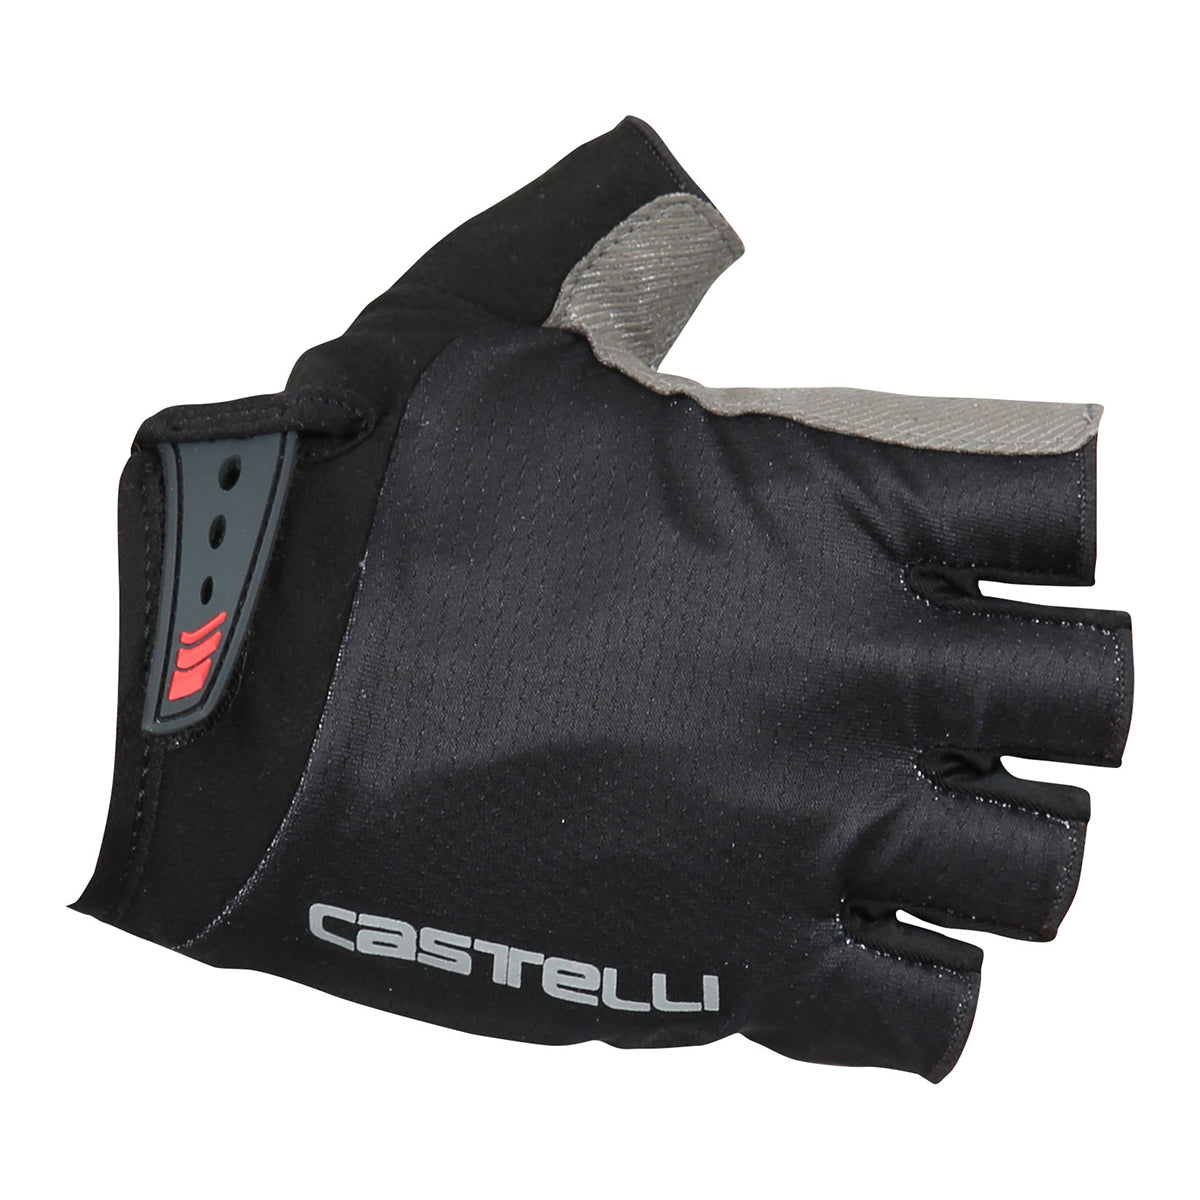 Castelli Entrata Youth Cycling Gloves